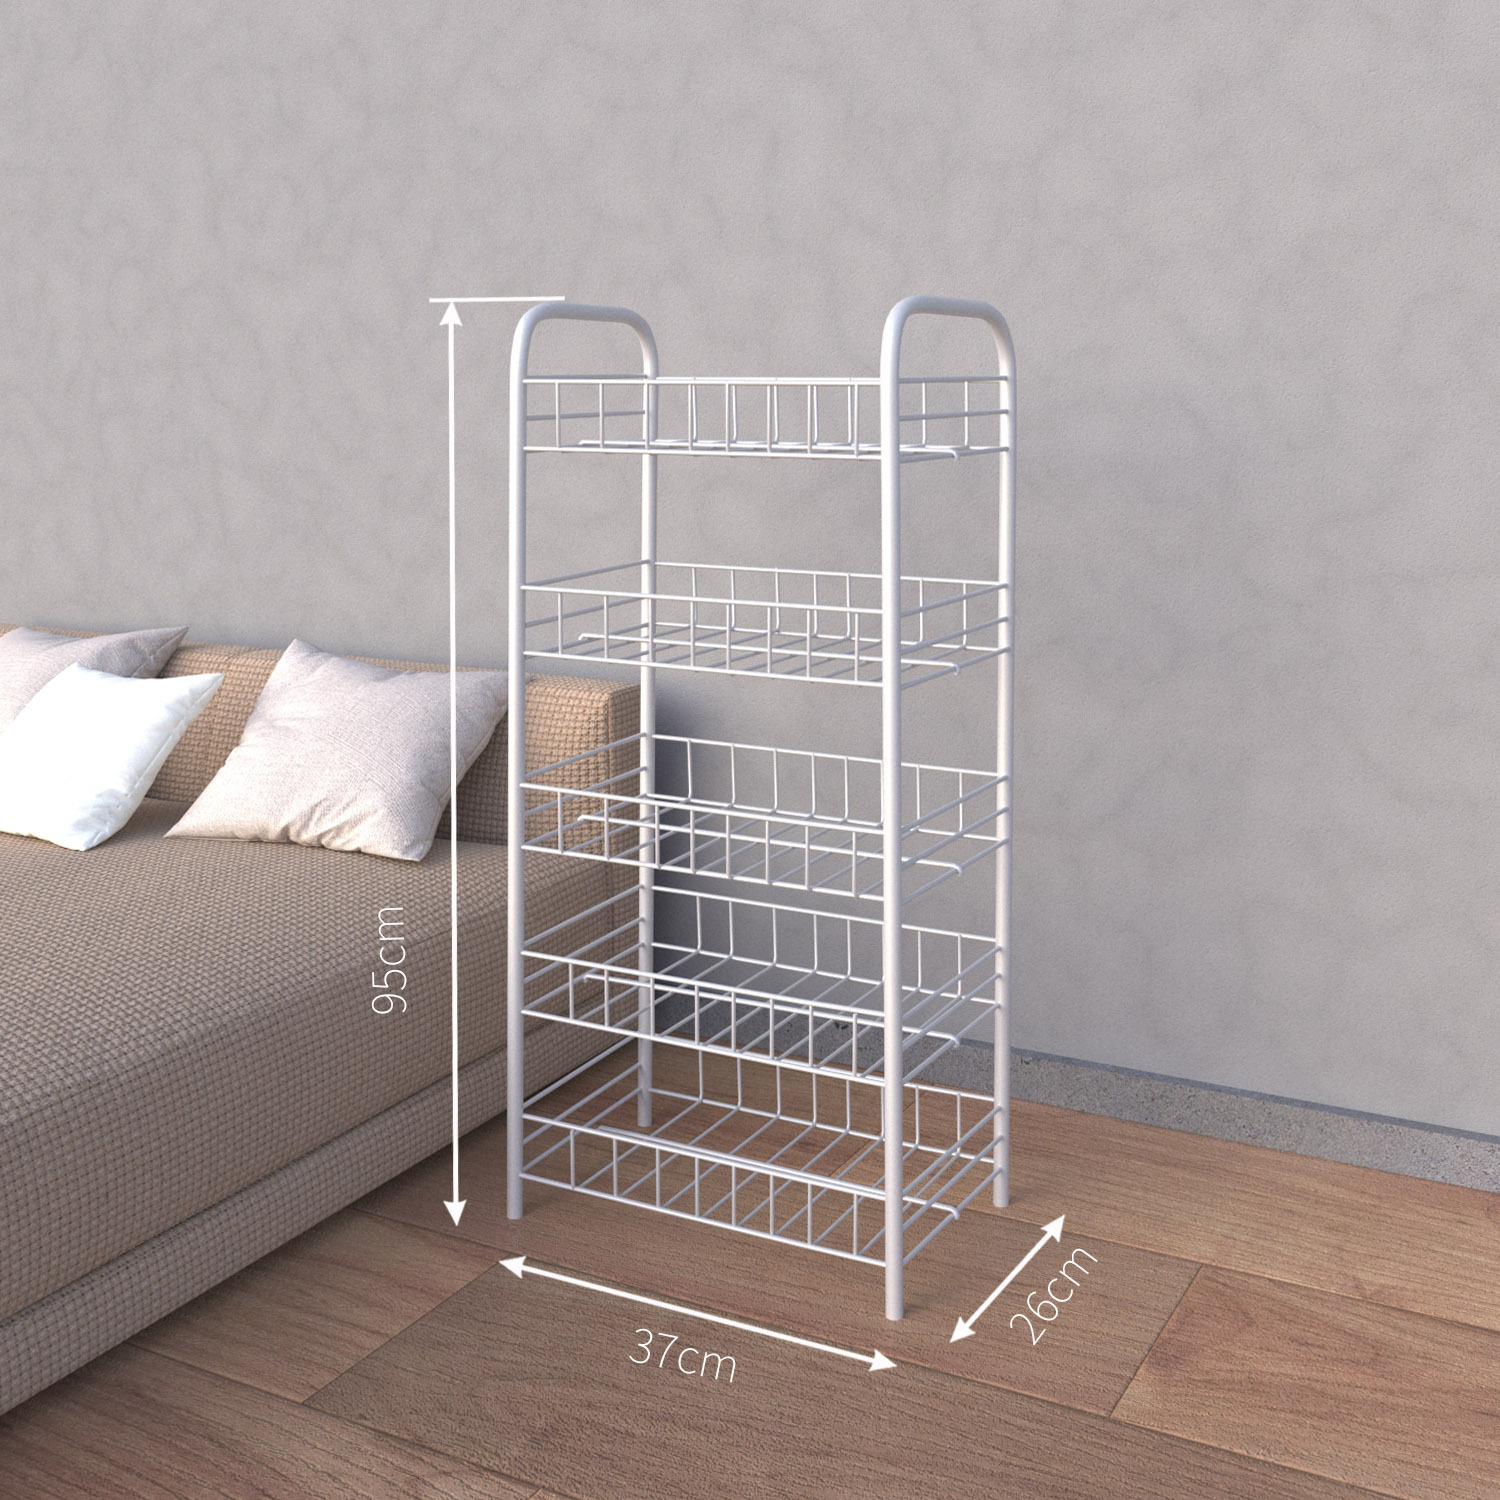 5 layers of white-iron wire rack